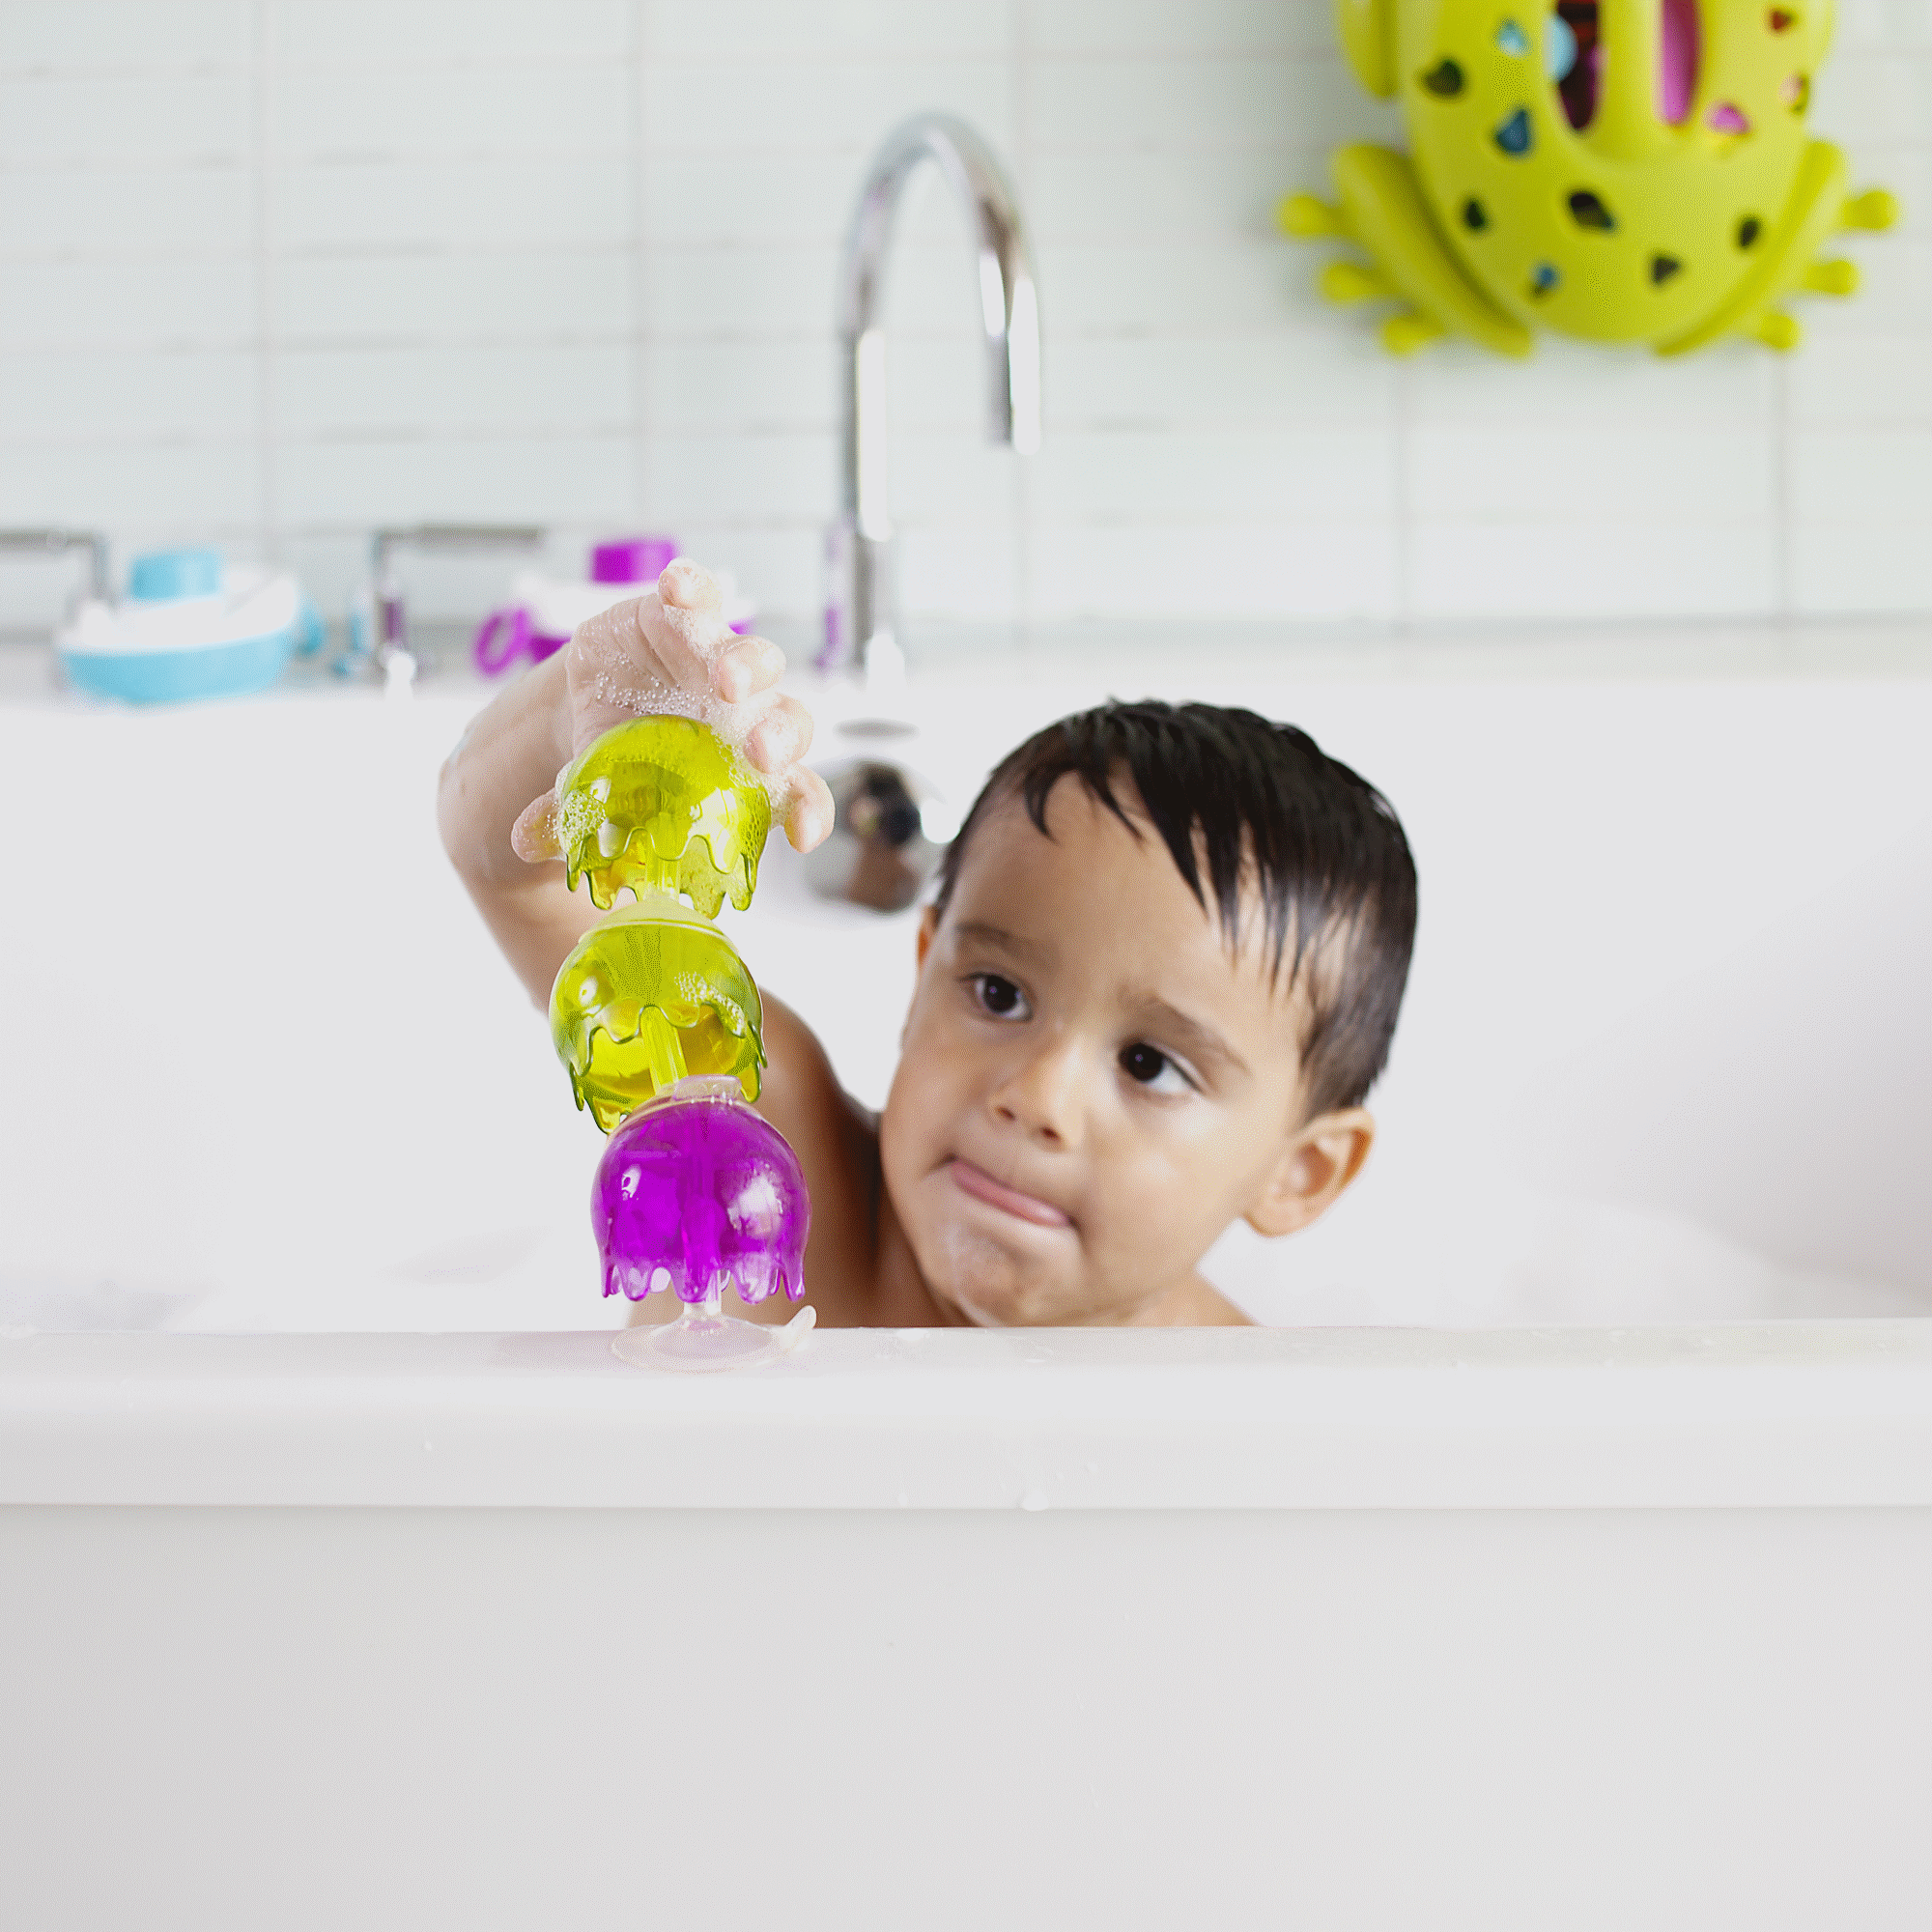 Boon Jellies Suction Cup Bath Toy